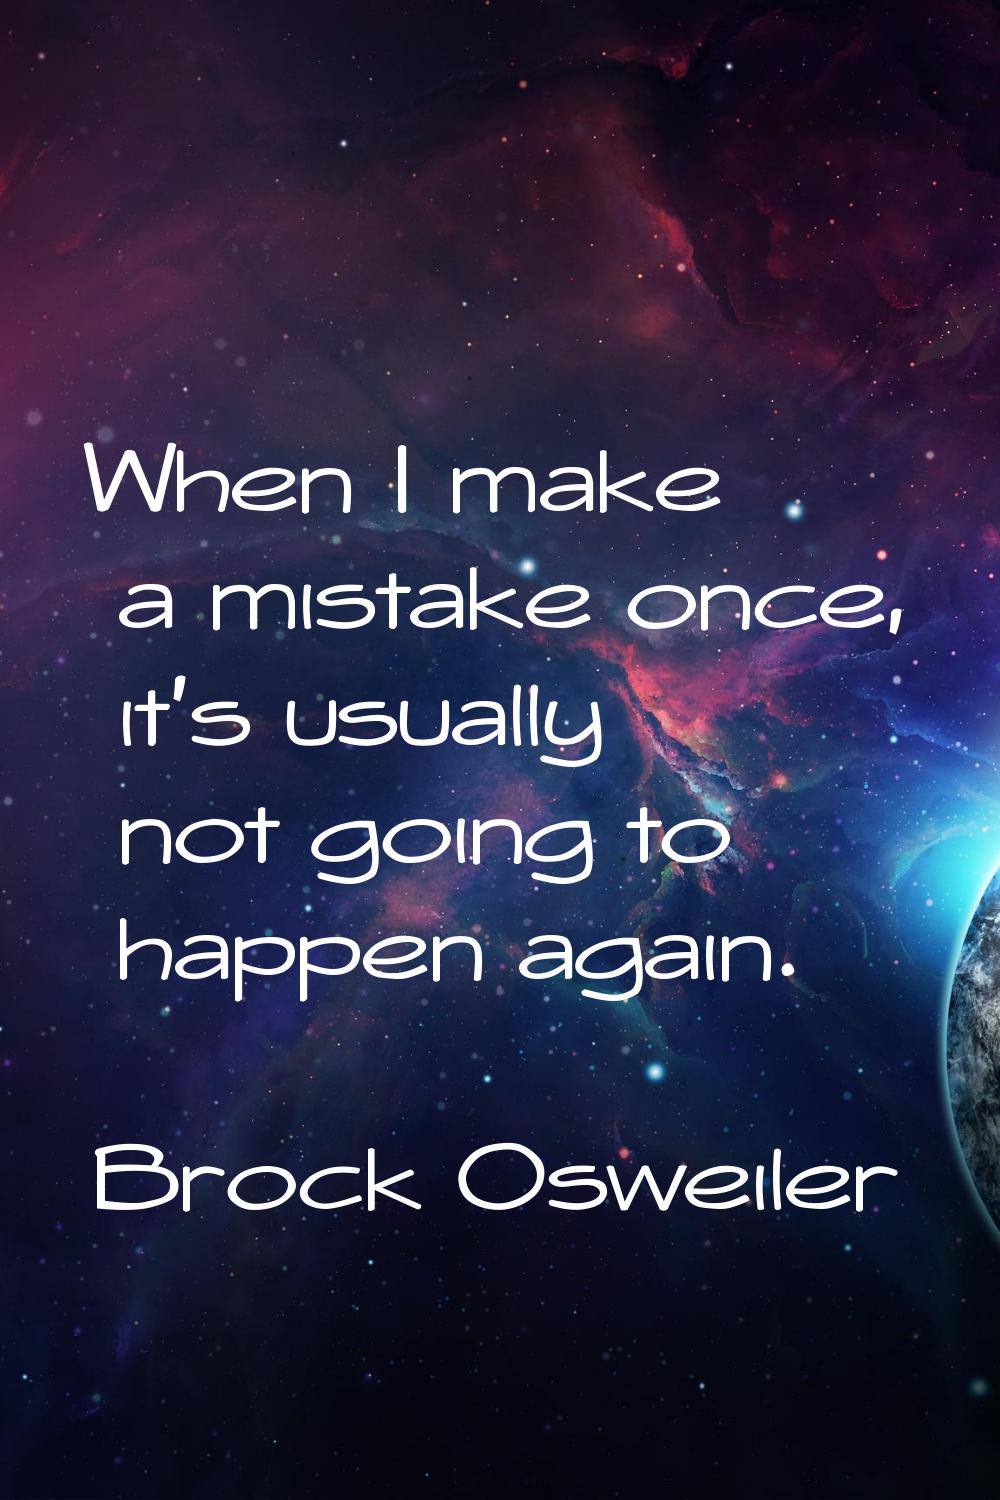 When I make a mistake once, it's usually not going to happen again.